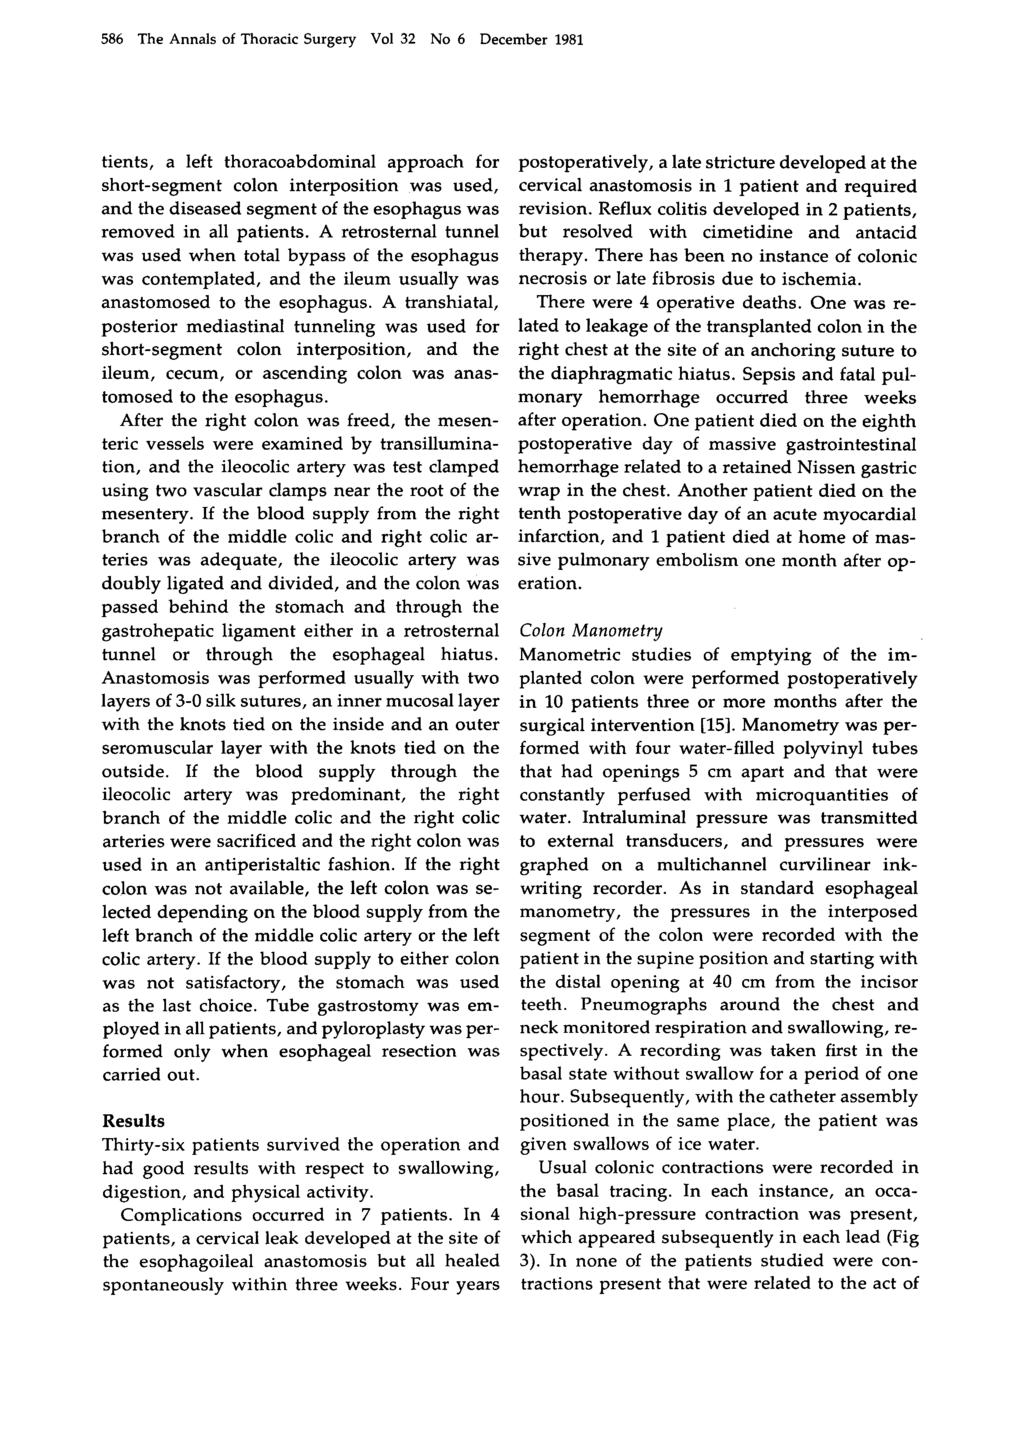 586 The Annals of Thoracic Surgery Vol 32 No 6 December 1981 tients, a left thoracoabdominal approach for short-segment colon interposition was used, and the diseased segment of the esophagus was